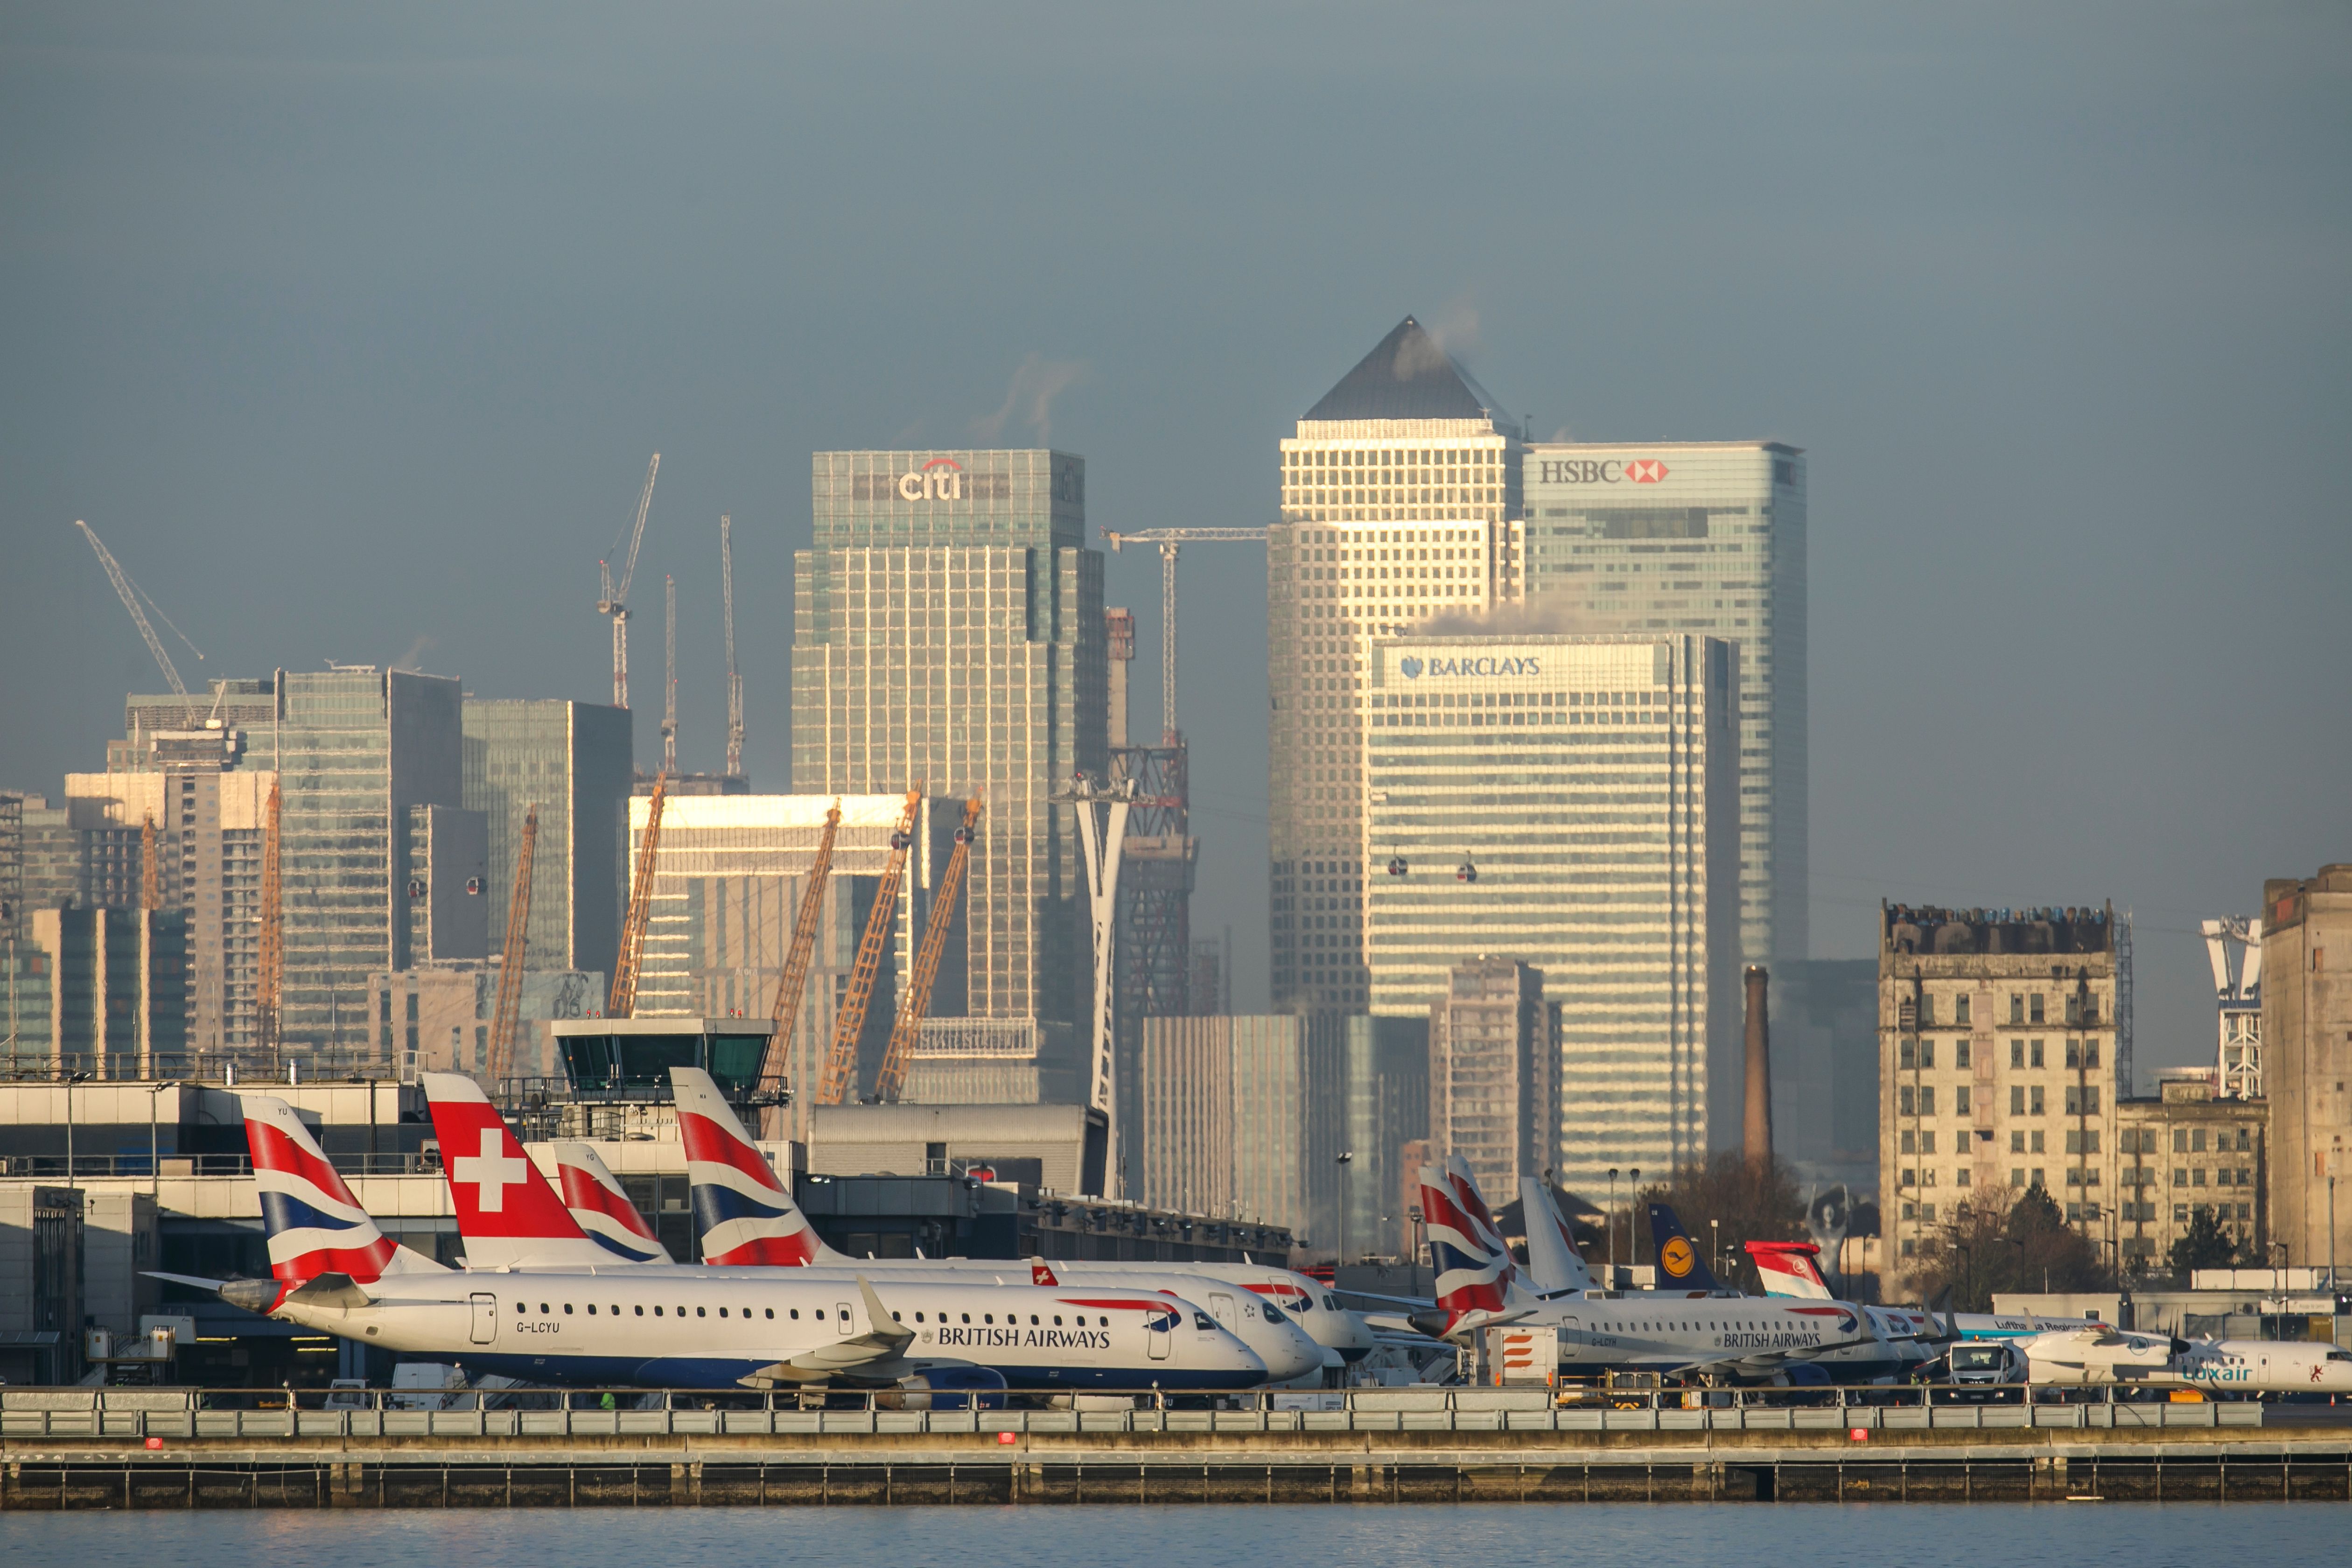 London City Airport with view of Canary Wharf